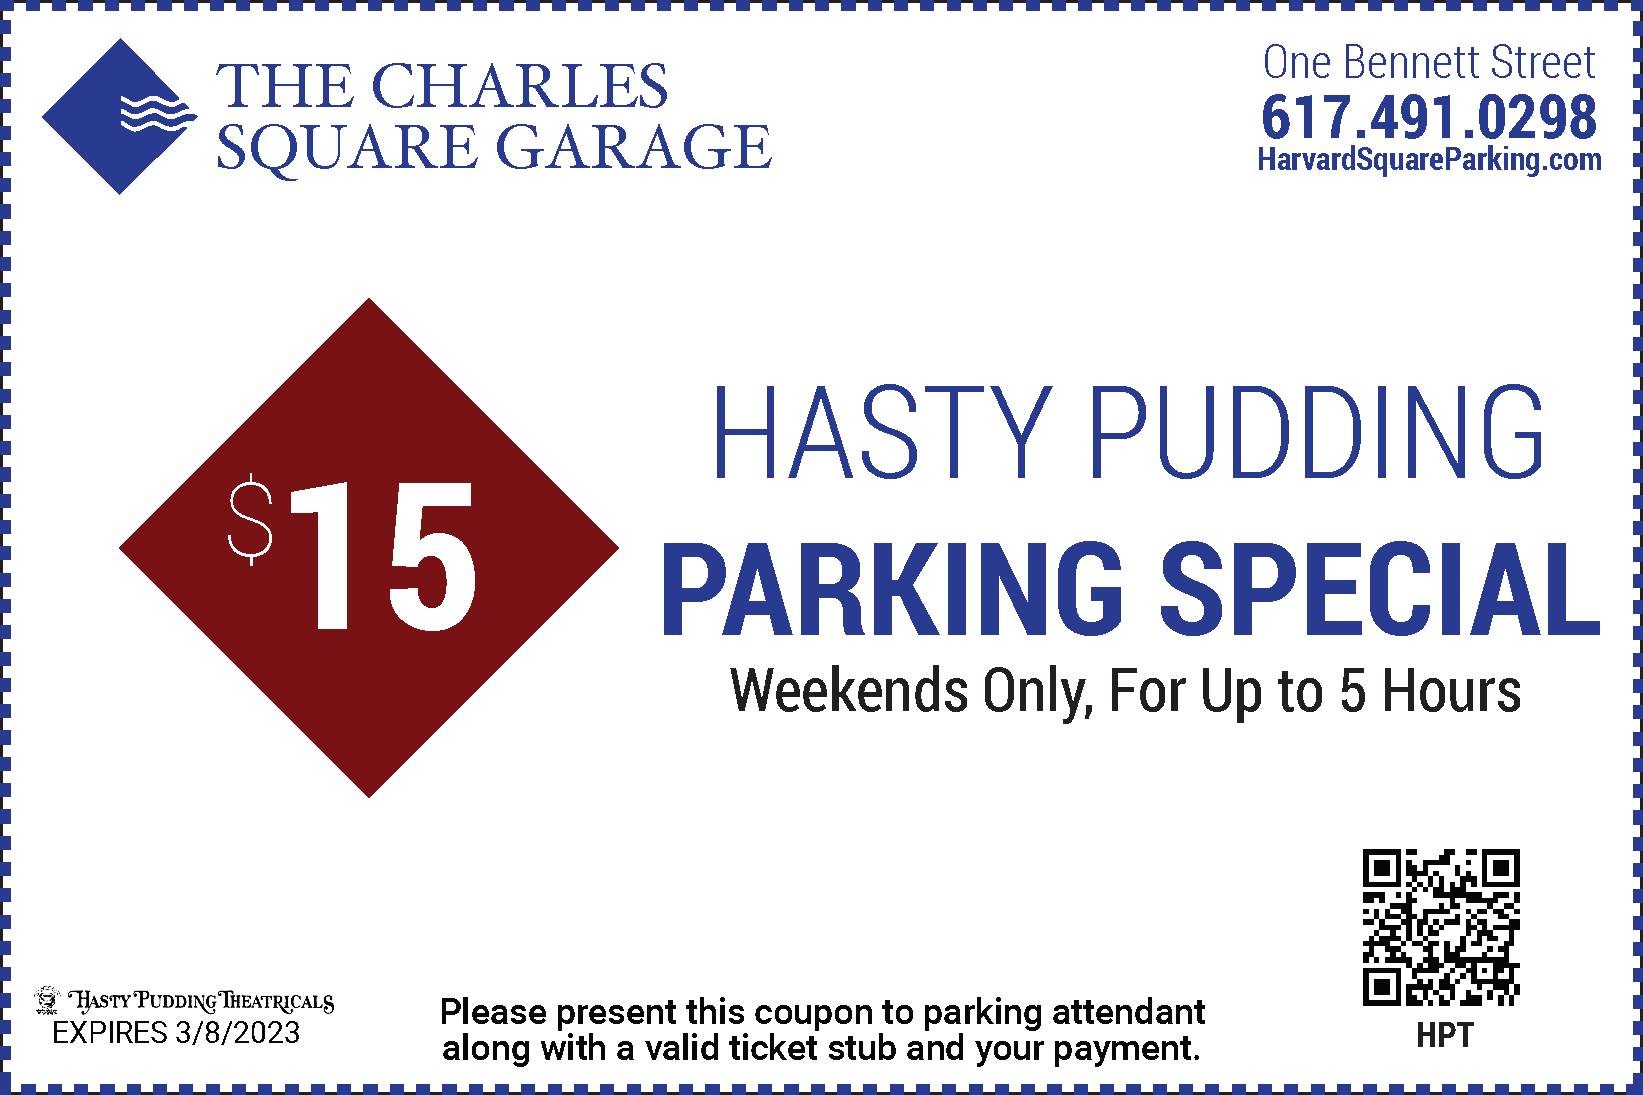 $15 Weekends Only - Hasty Pudding Special